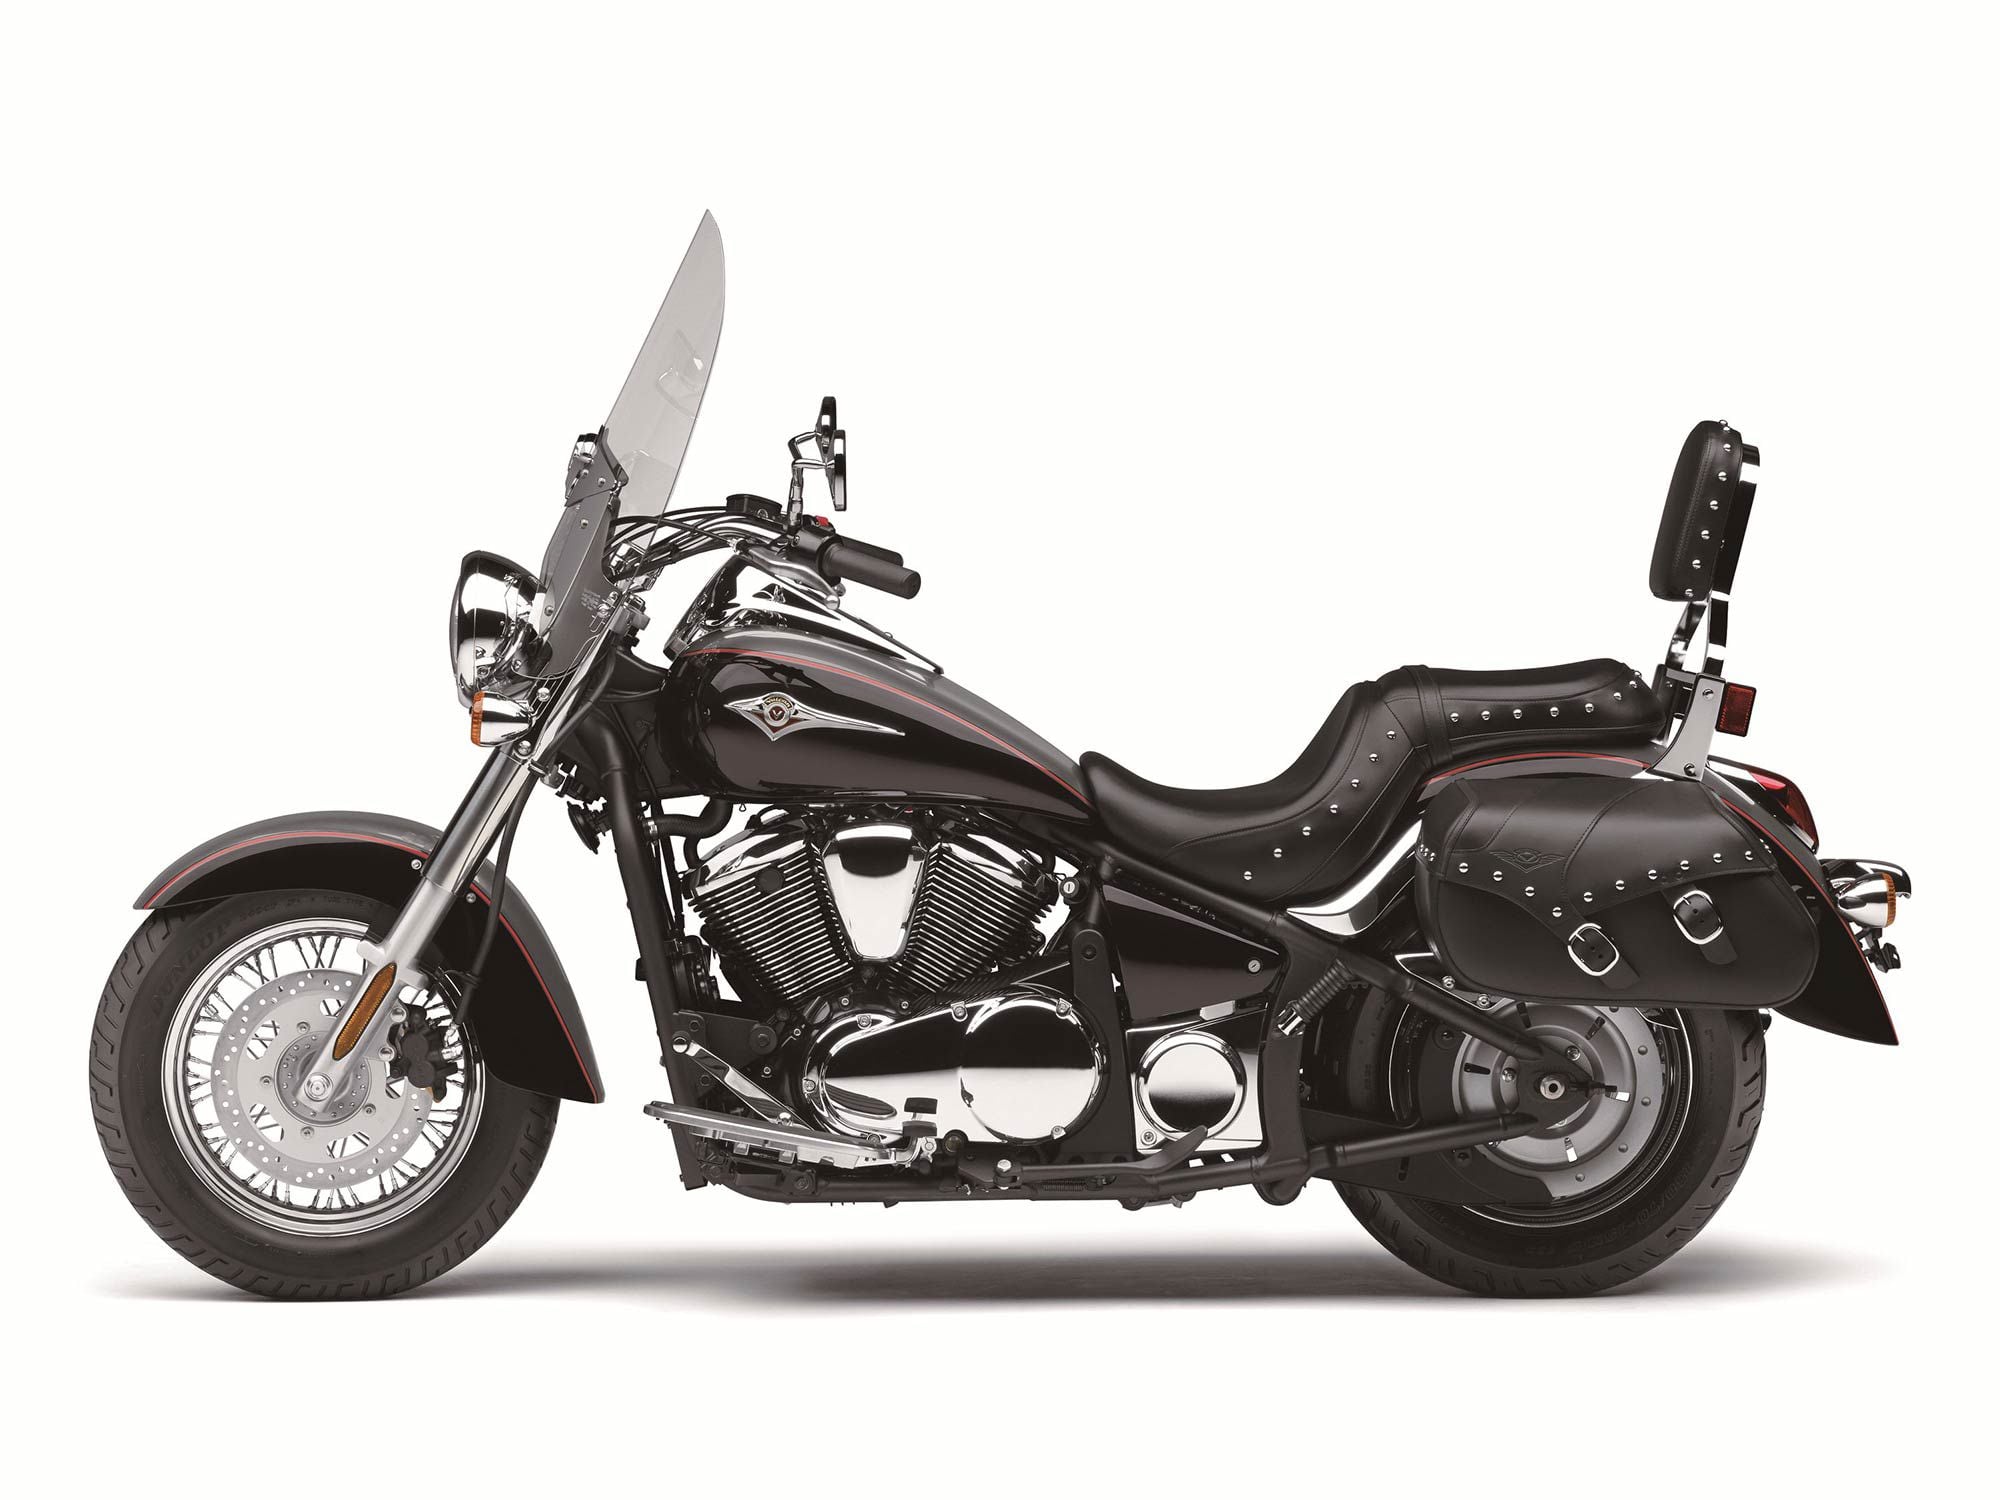 The classic light-duty touring cruiser returns in the form of the 2023 Kawasaki Vulcan 900 Classic LT.